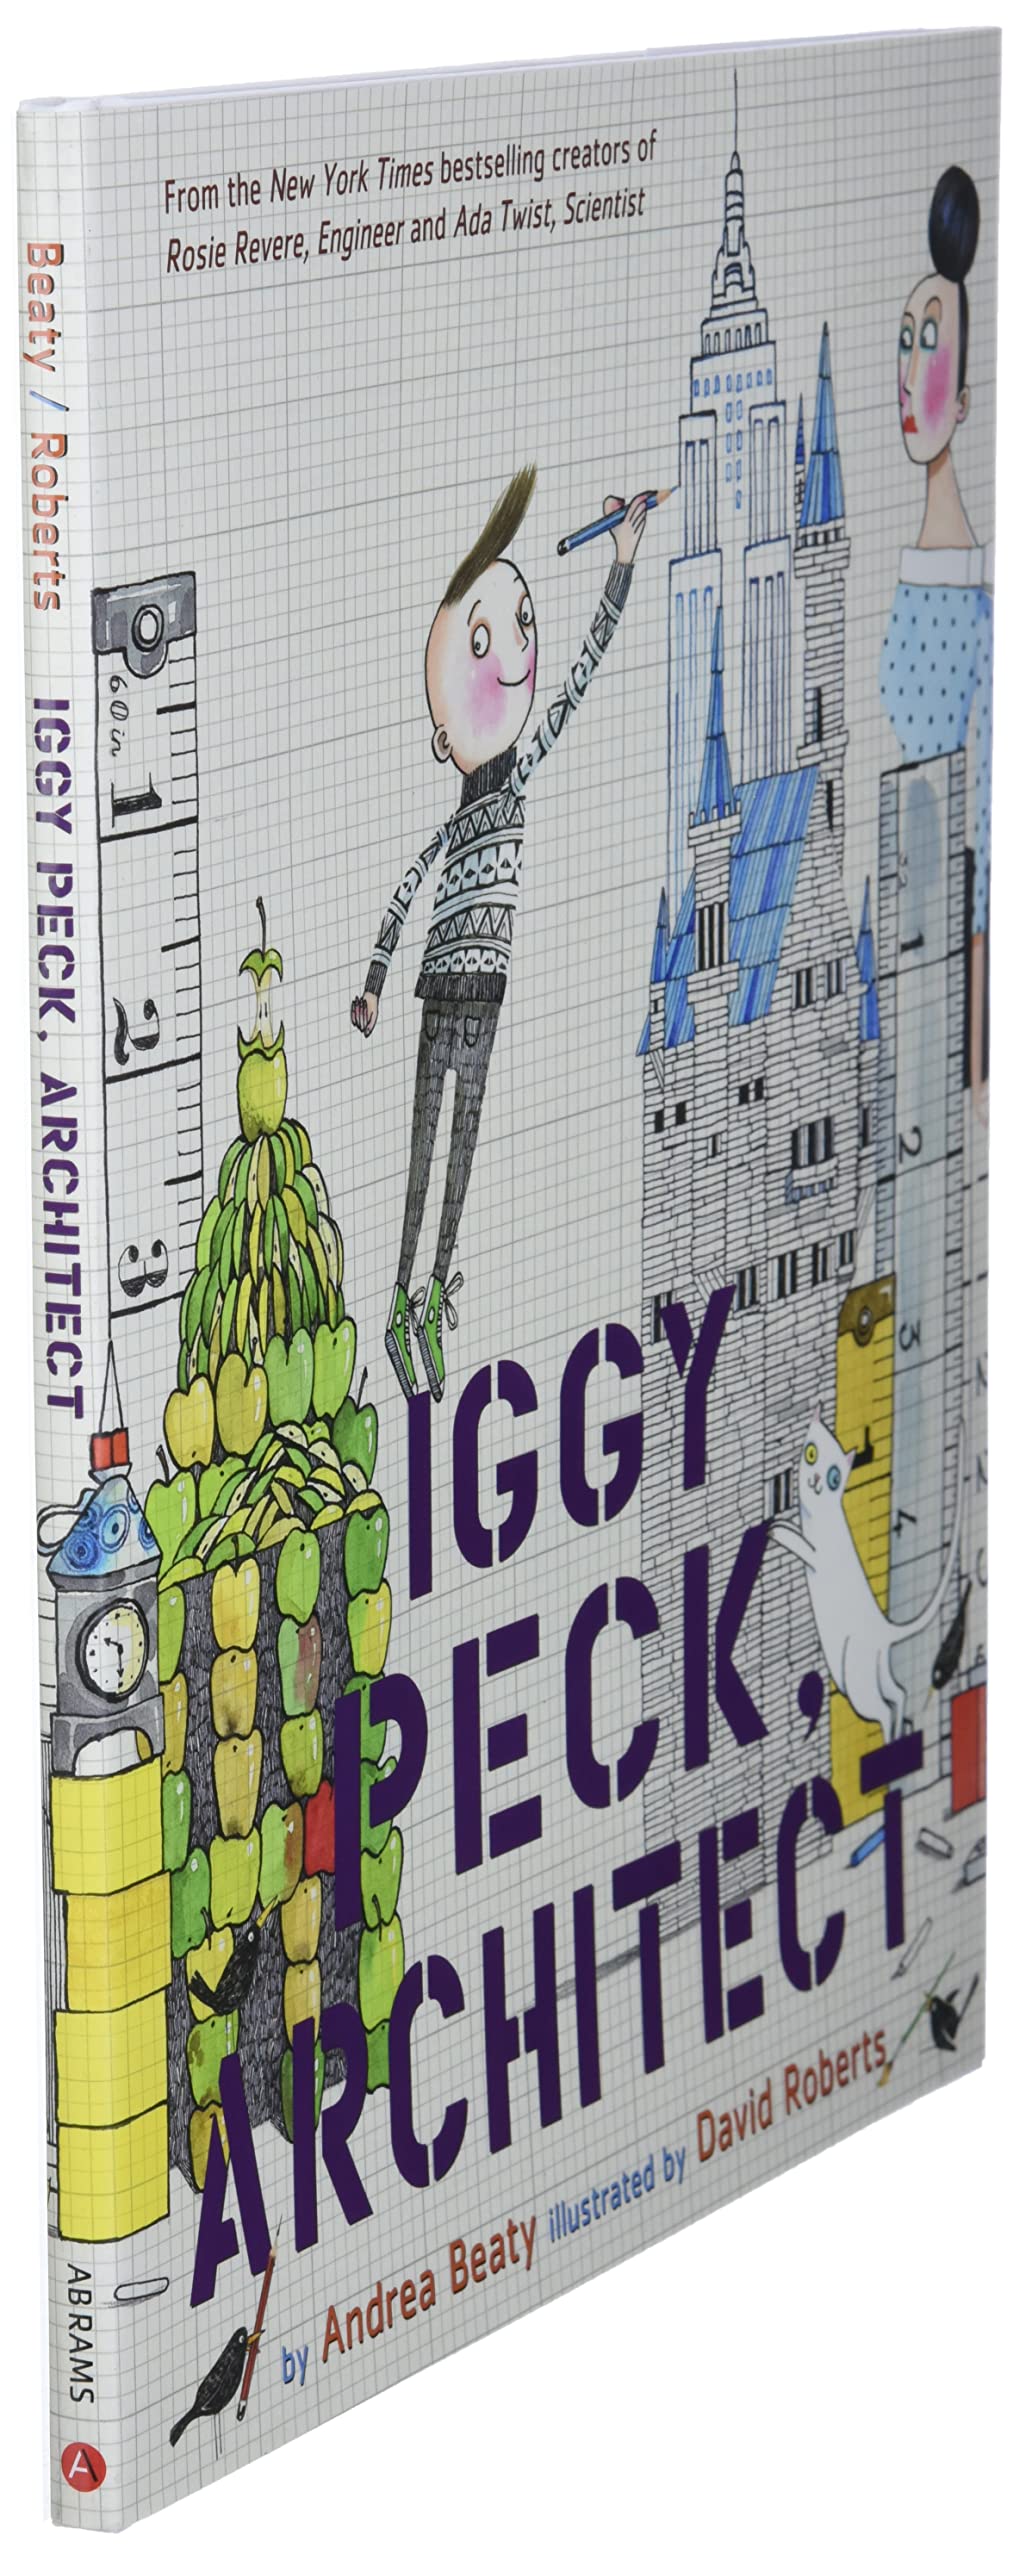 Iggy Peck, Architect (The Questioneers)